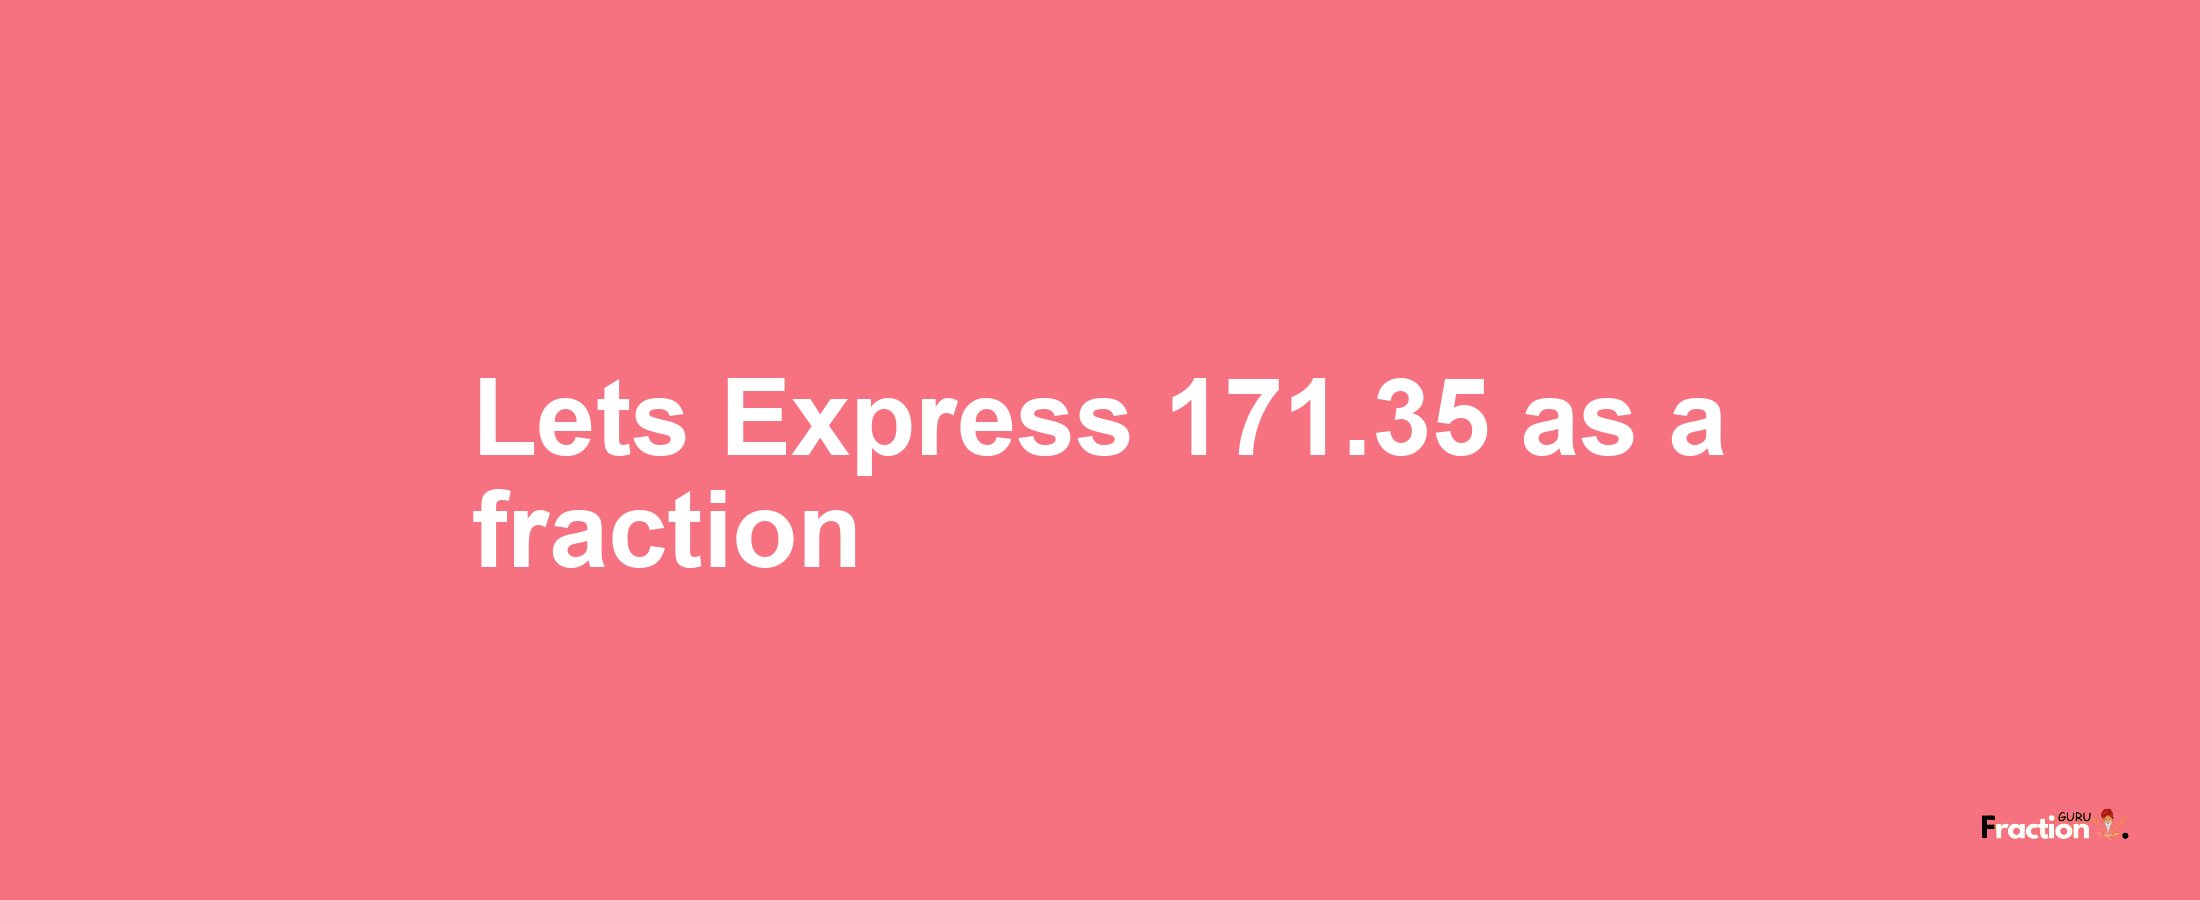 Lets Express 171.35 as afraction